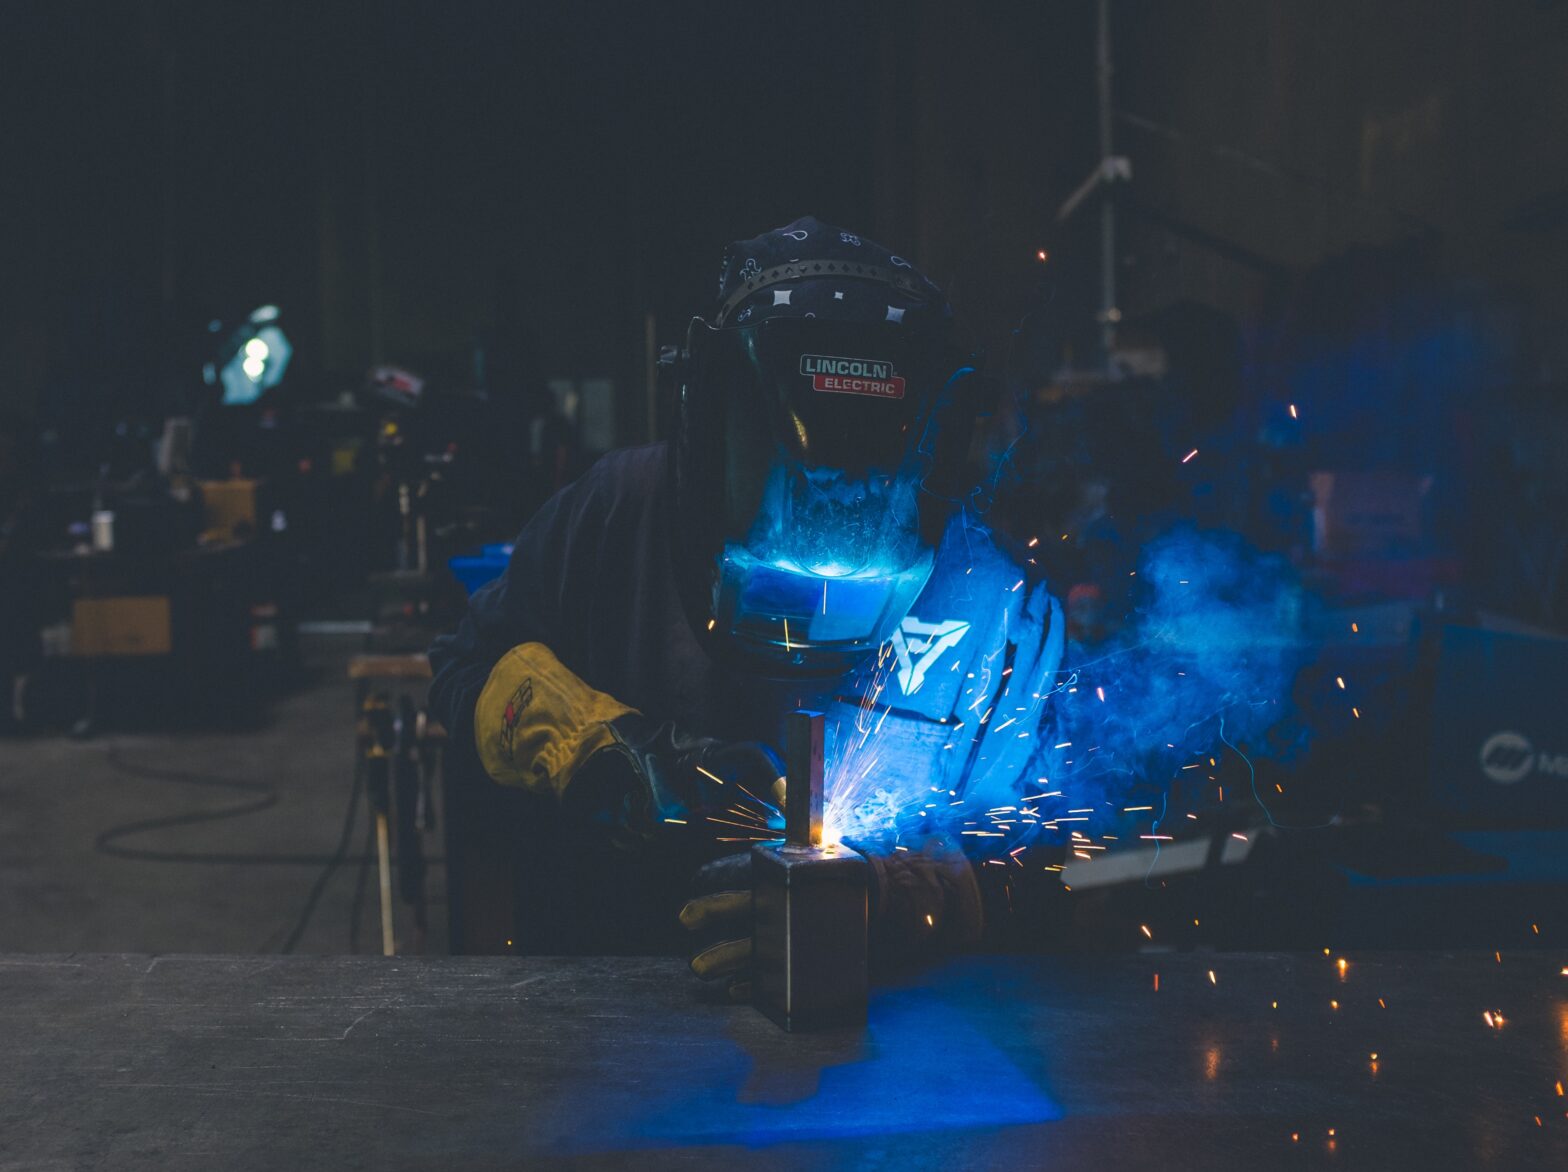 An image of a person welding, wearing PPE